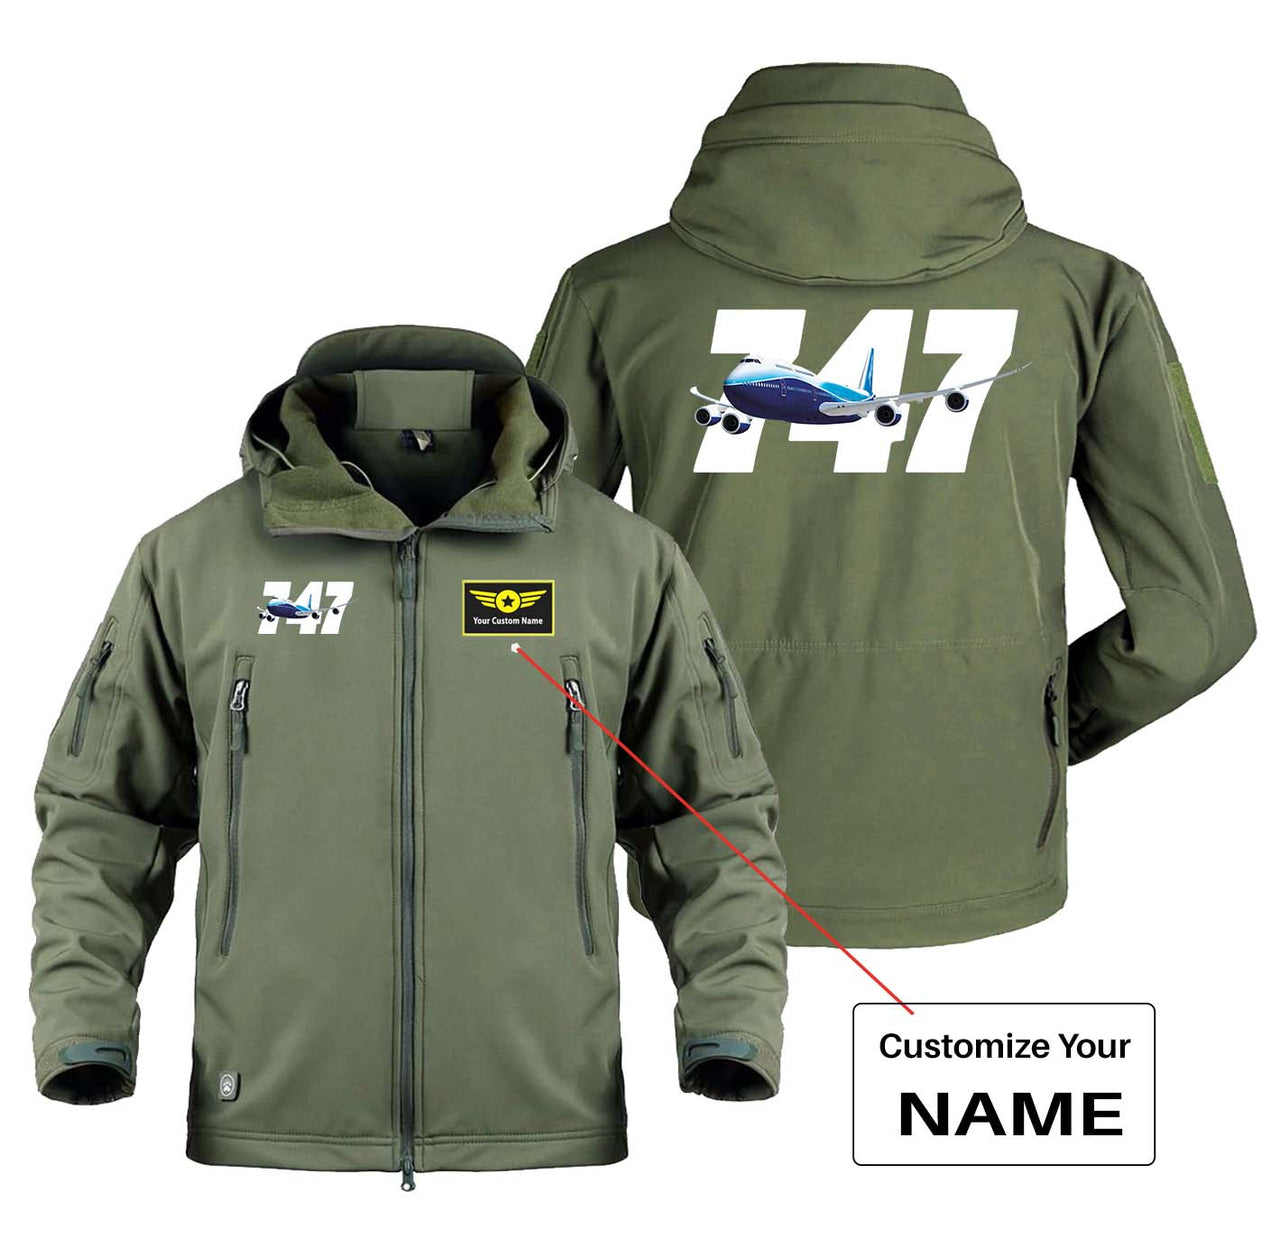 Super Boeing 747 Designed Military Jackets (Customizable)